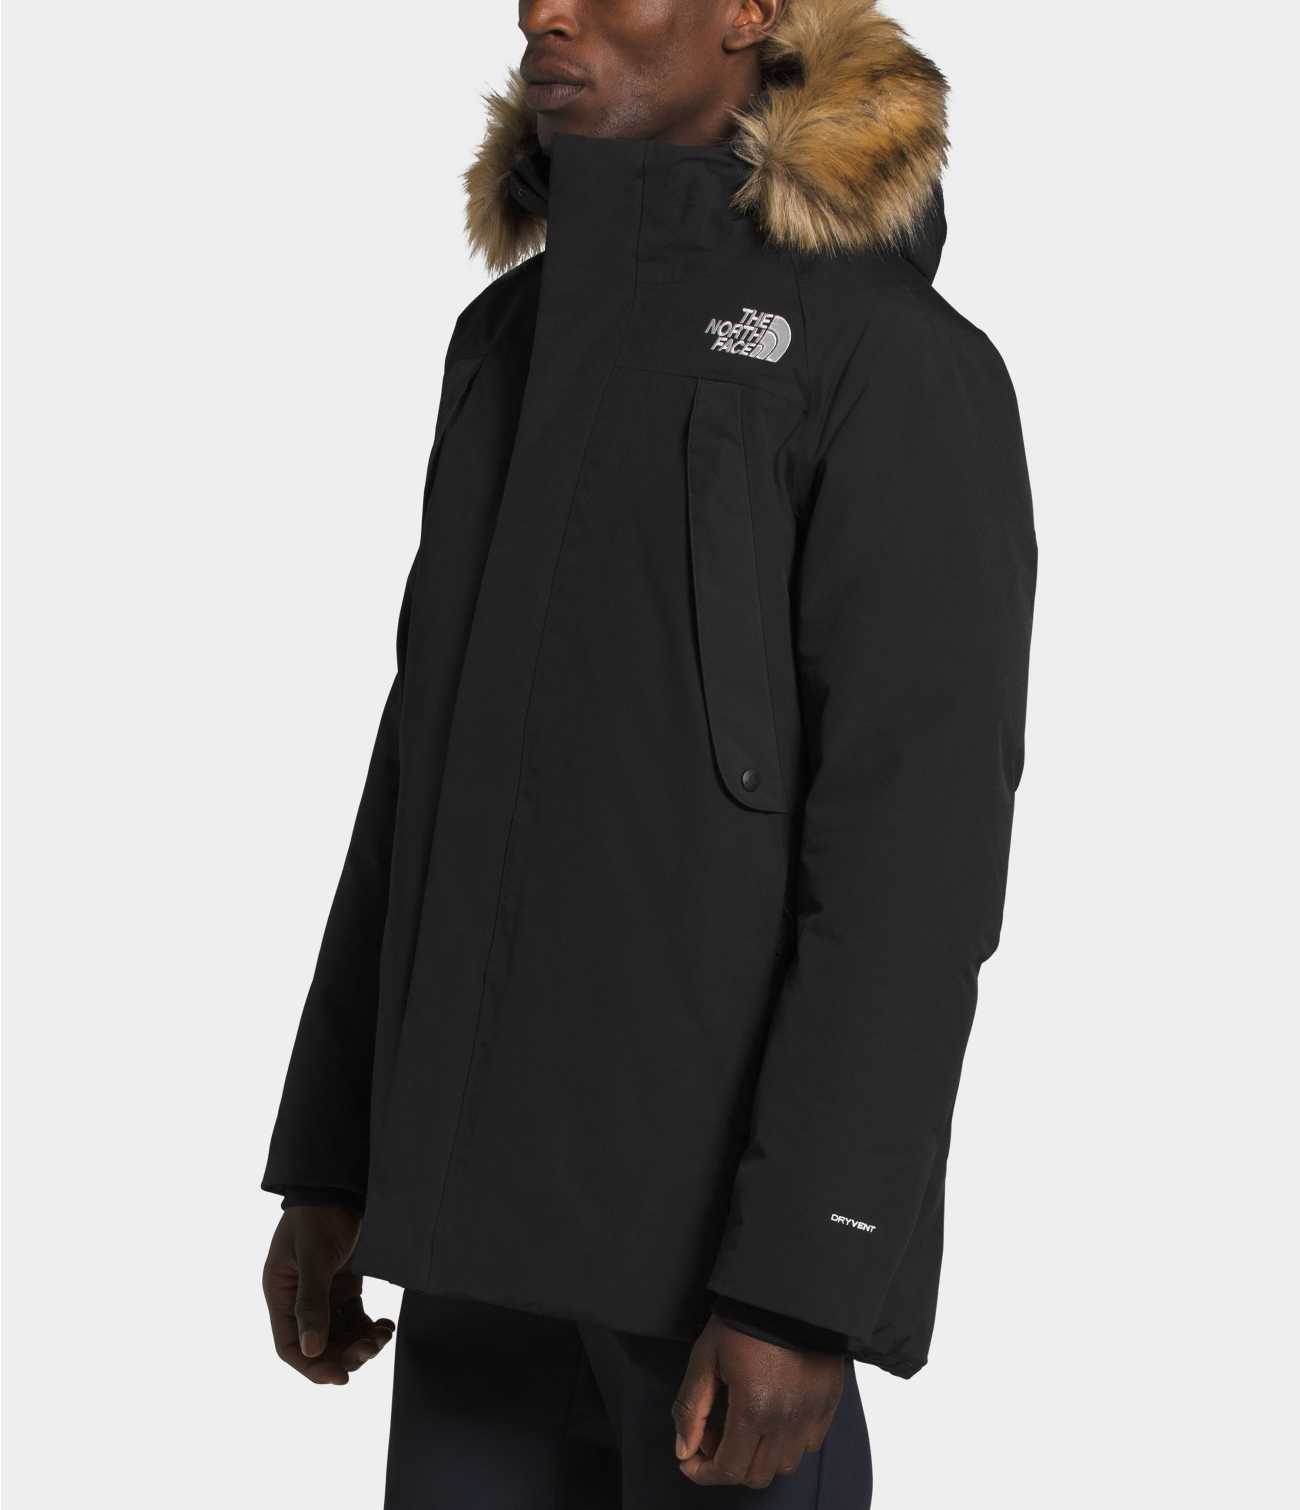 MEN'S NEW OUTERBOROUGHS JACKET | The North Face | The North Face 